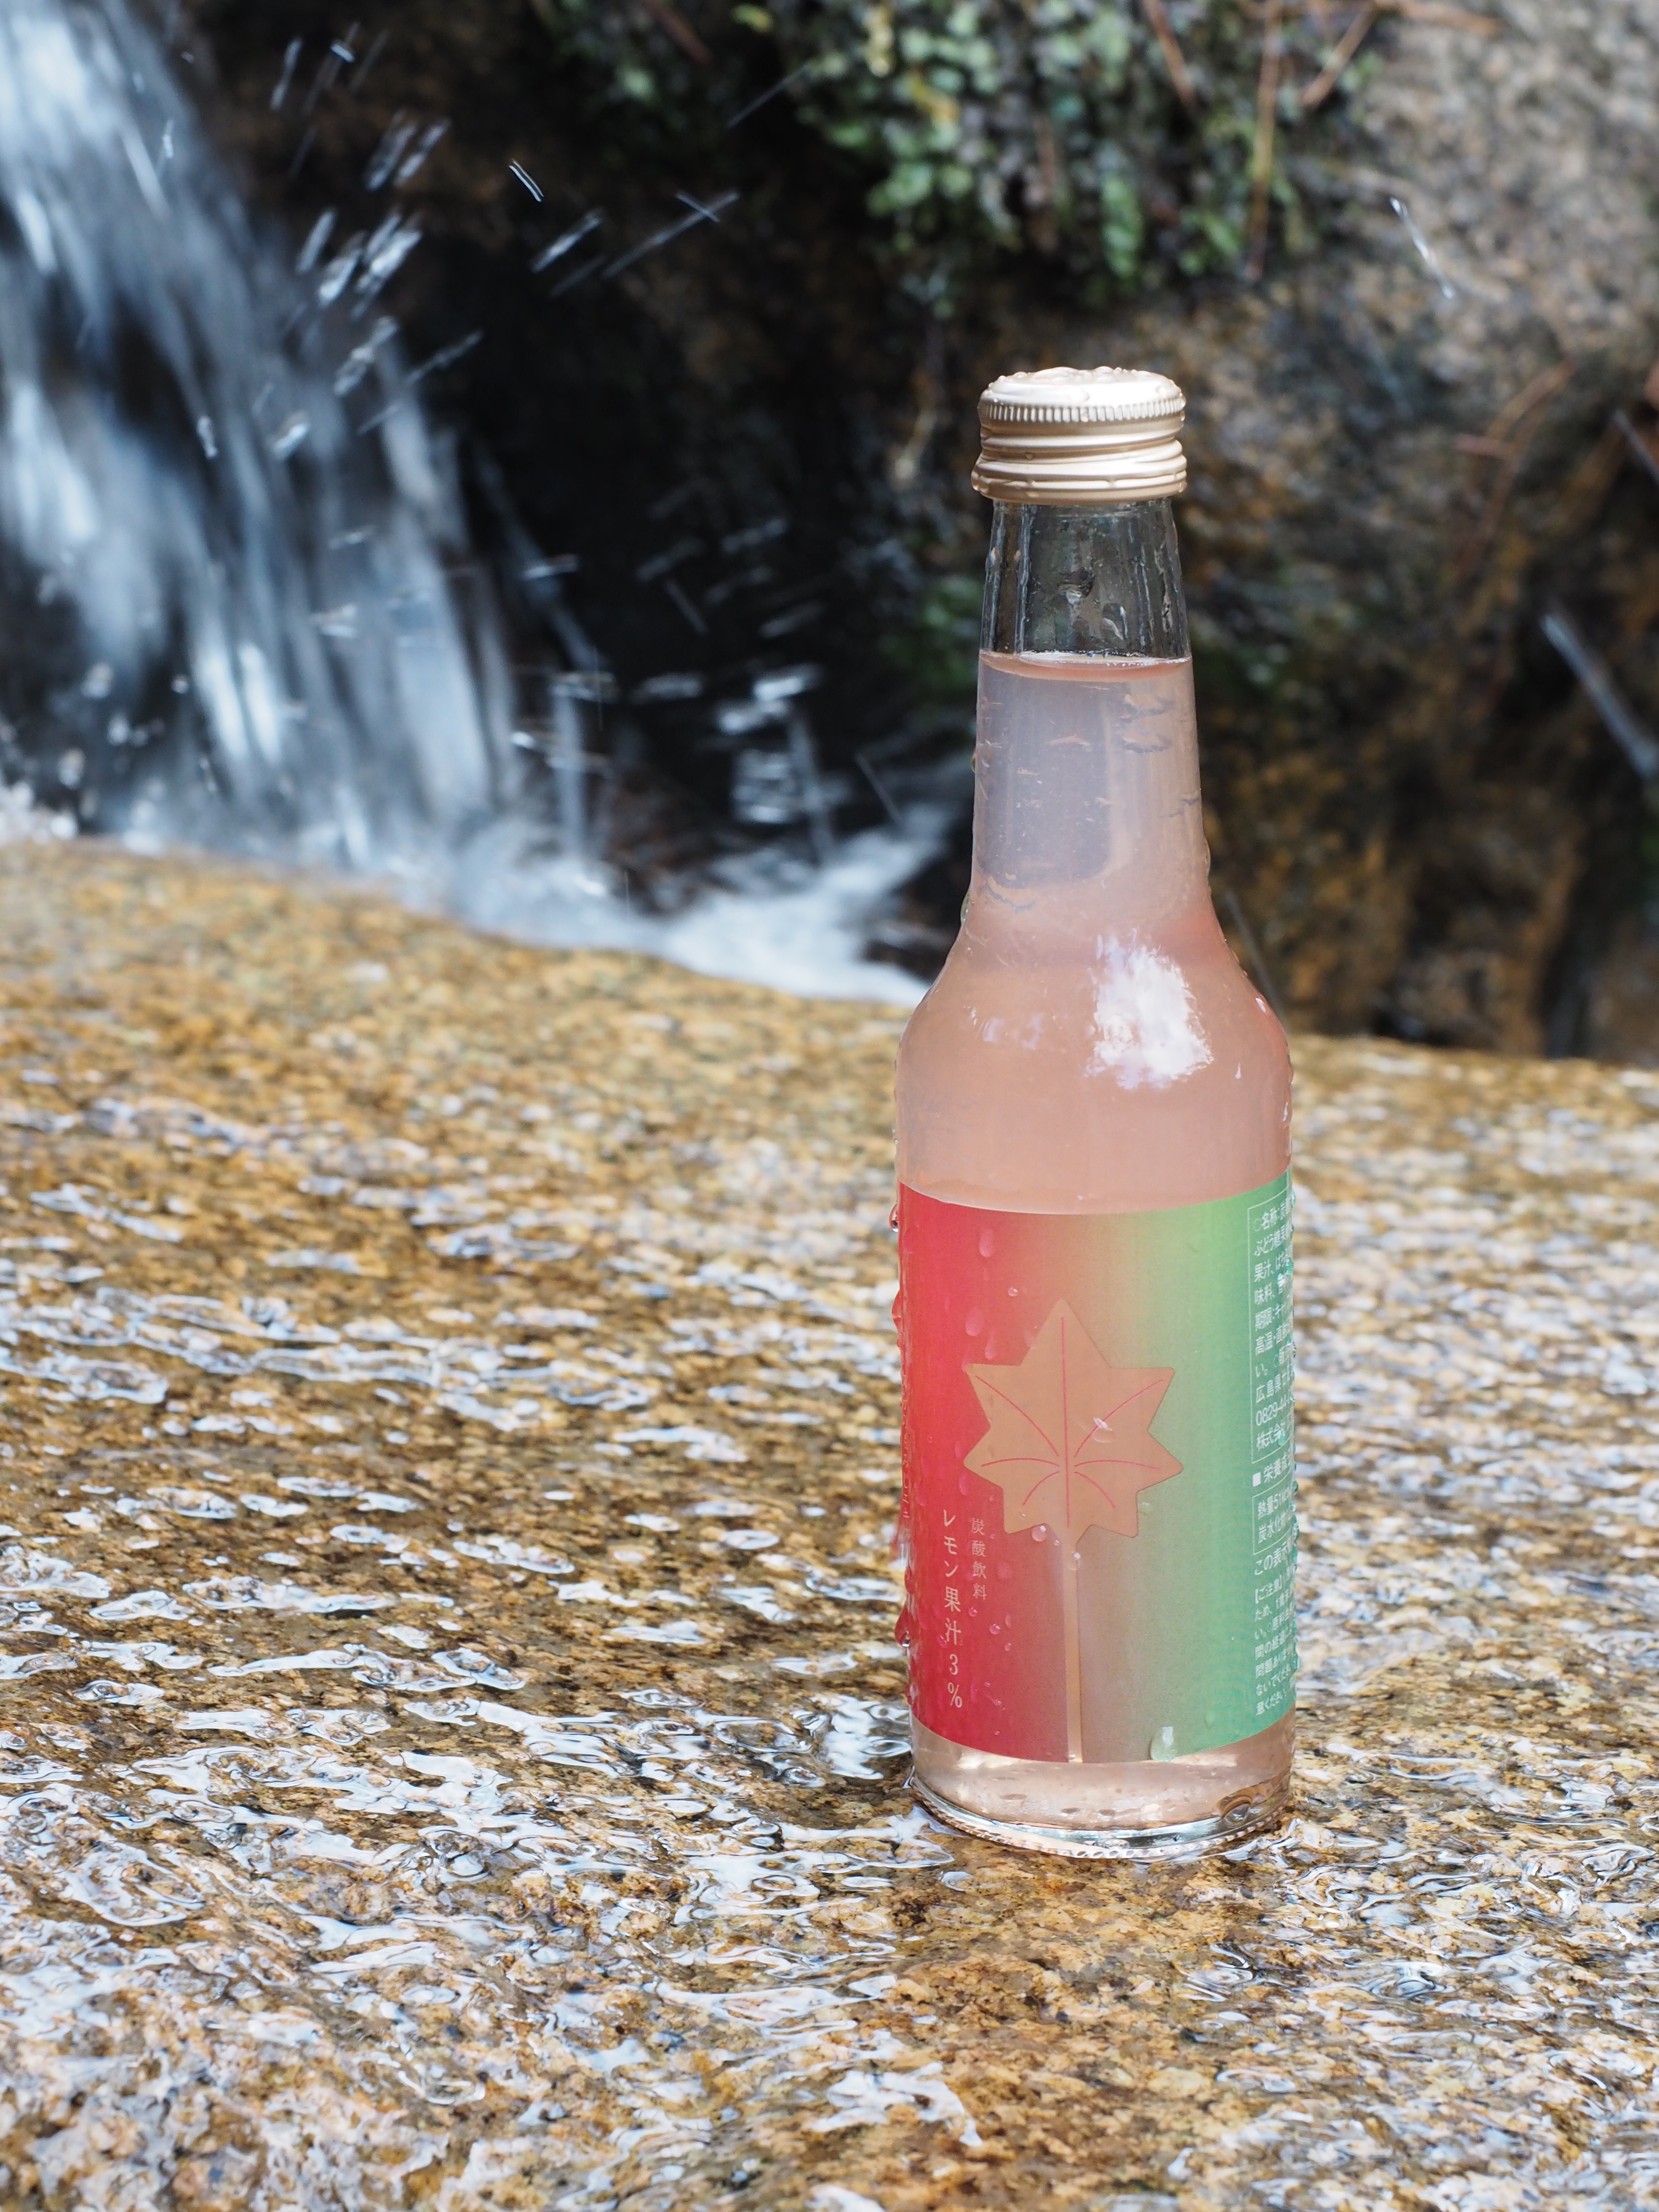 【Autumn Leaves x Souvenirs】Food and drinks made with autumn leaves - not just Momiji Manju!